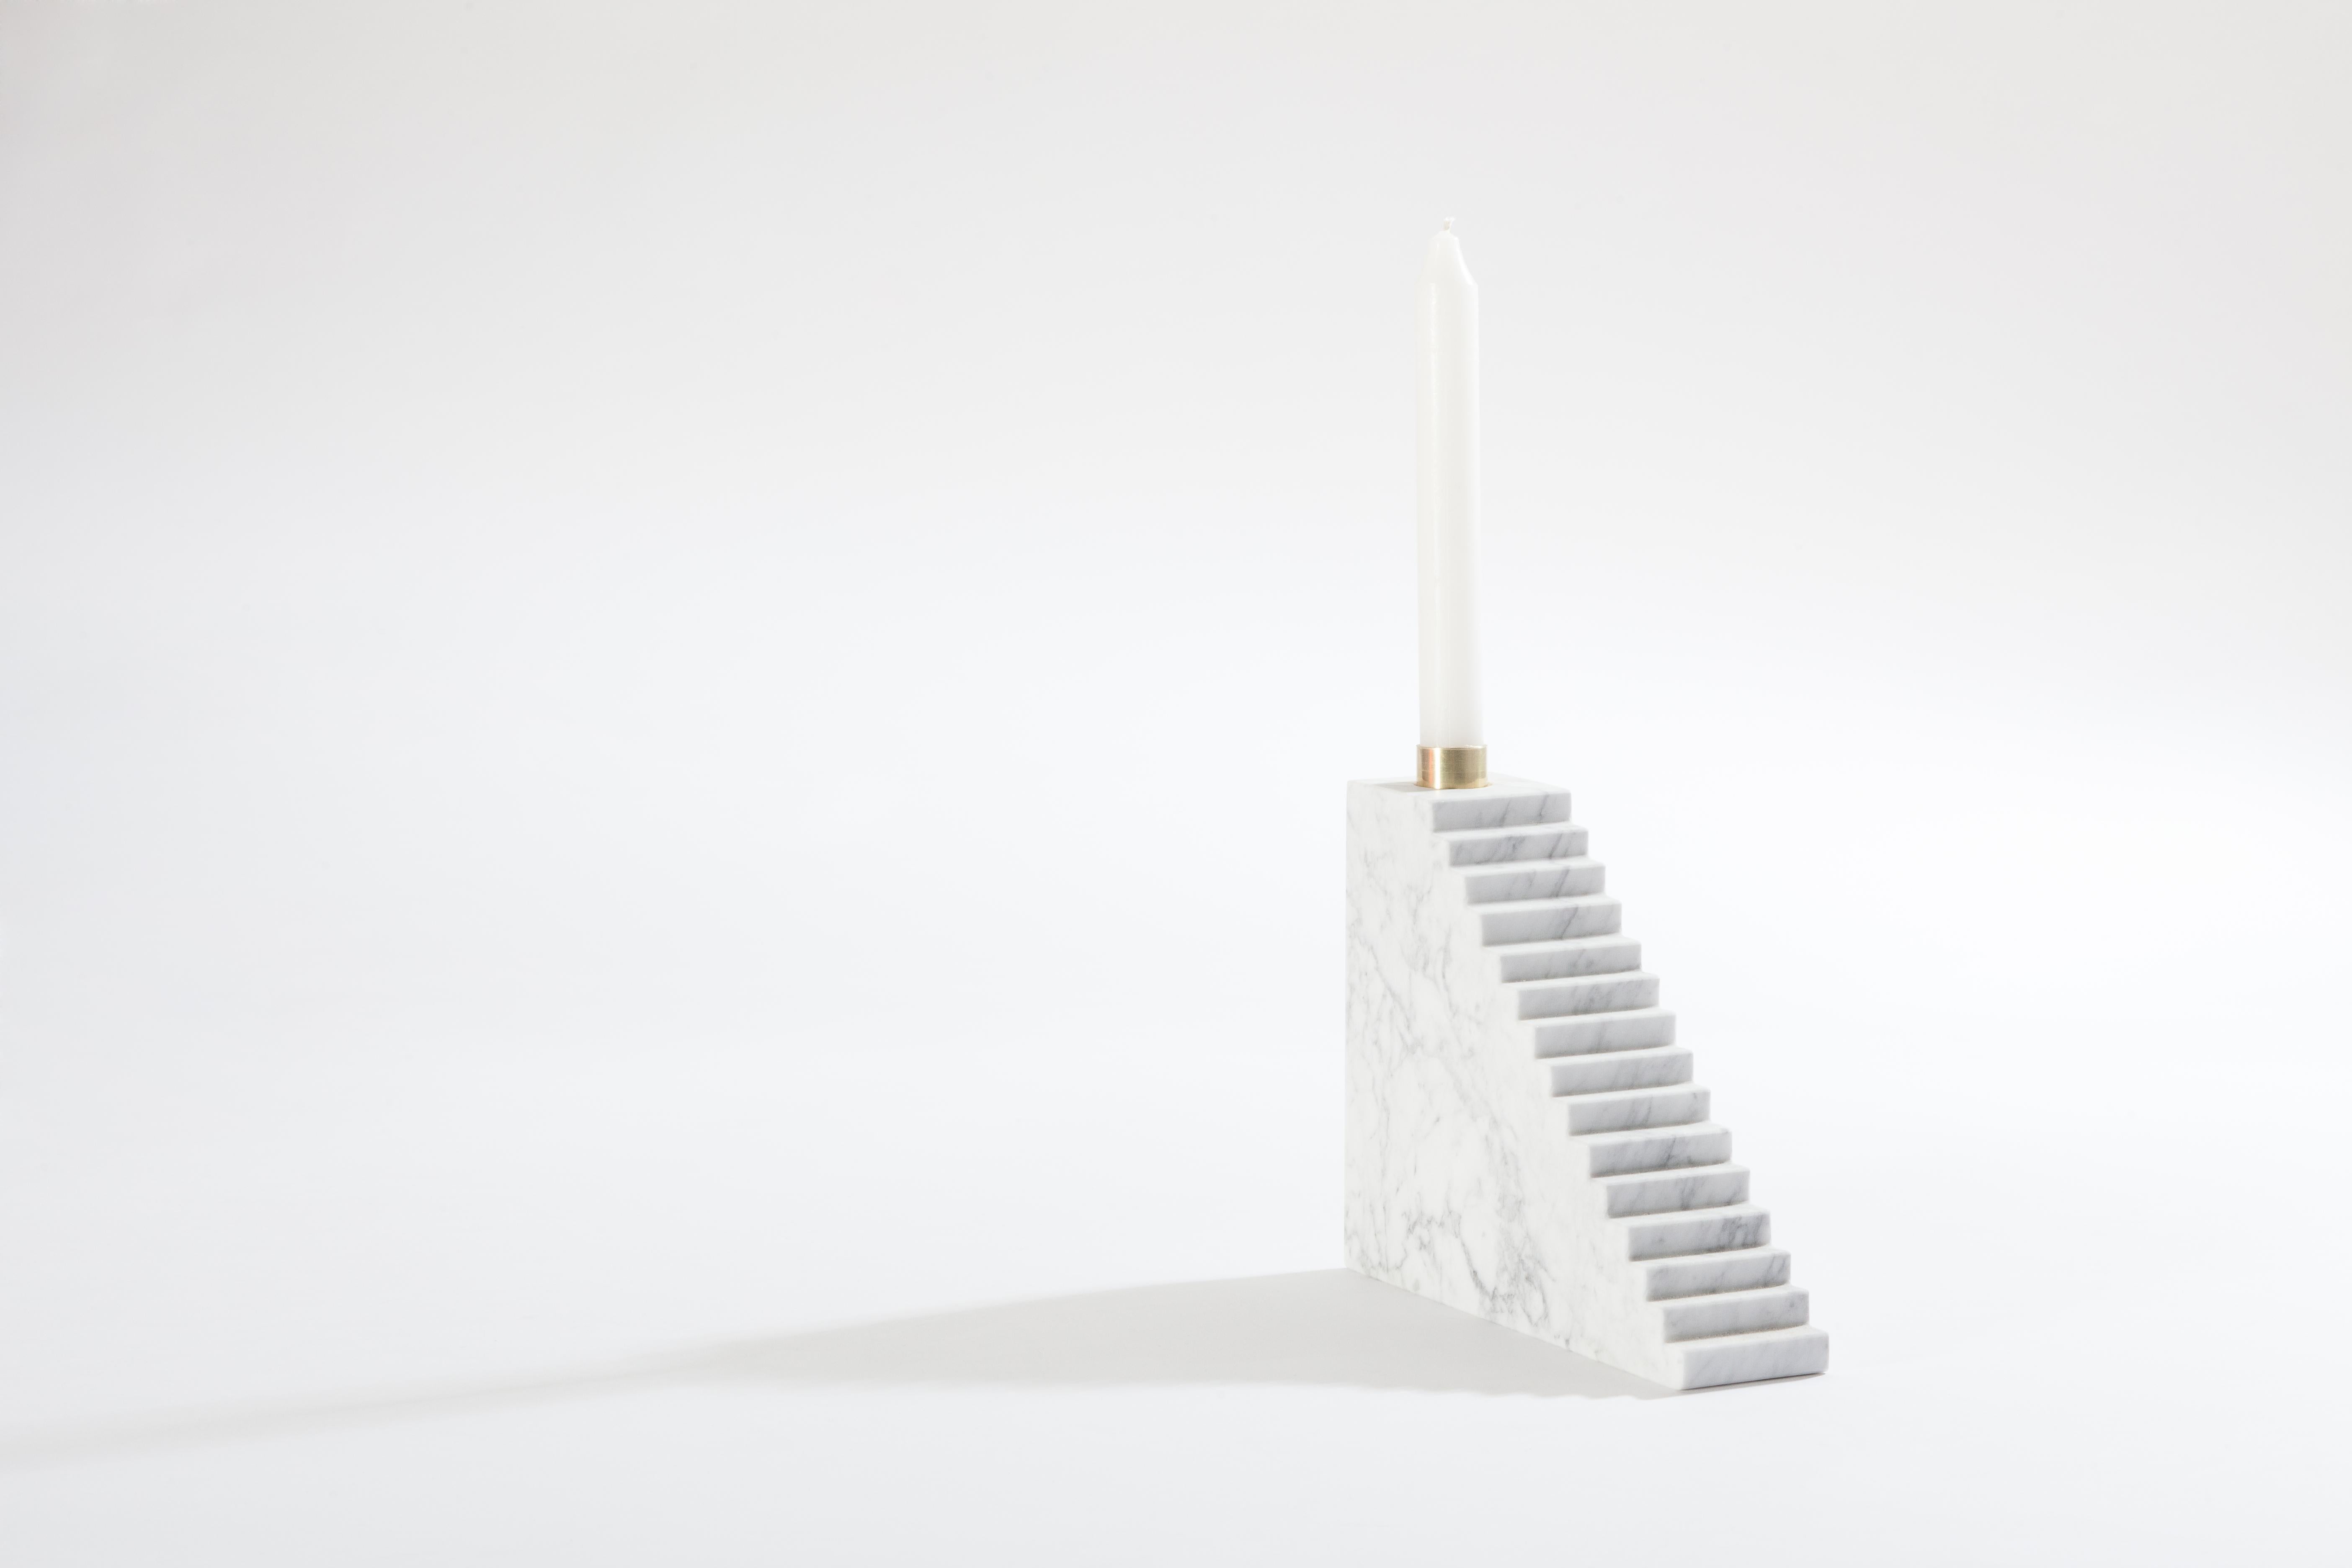 Stairs by Joseph Vila Capdevila
Material: Carrara marble, brass
Dimensions: 15 x 20.5 x 5 cm
Weight: 2.5 kg

Aparentment is a space for creation and innovation, experimenting with materials with the goal to develop robust, lasting and timeless